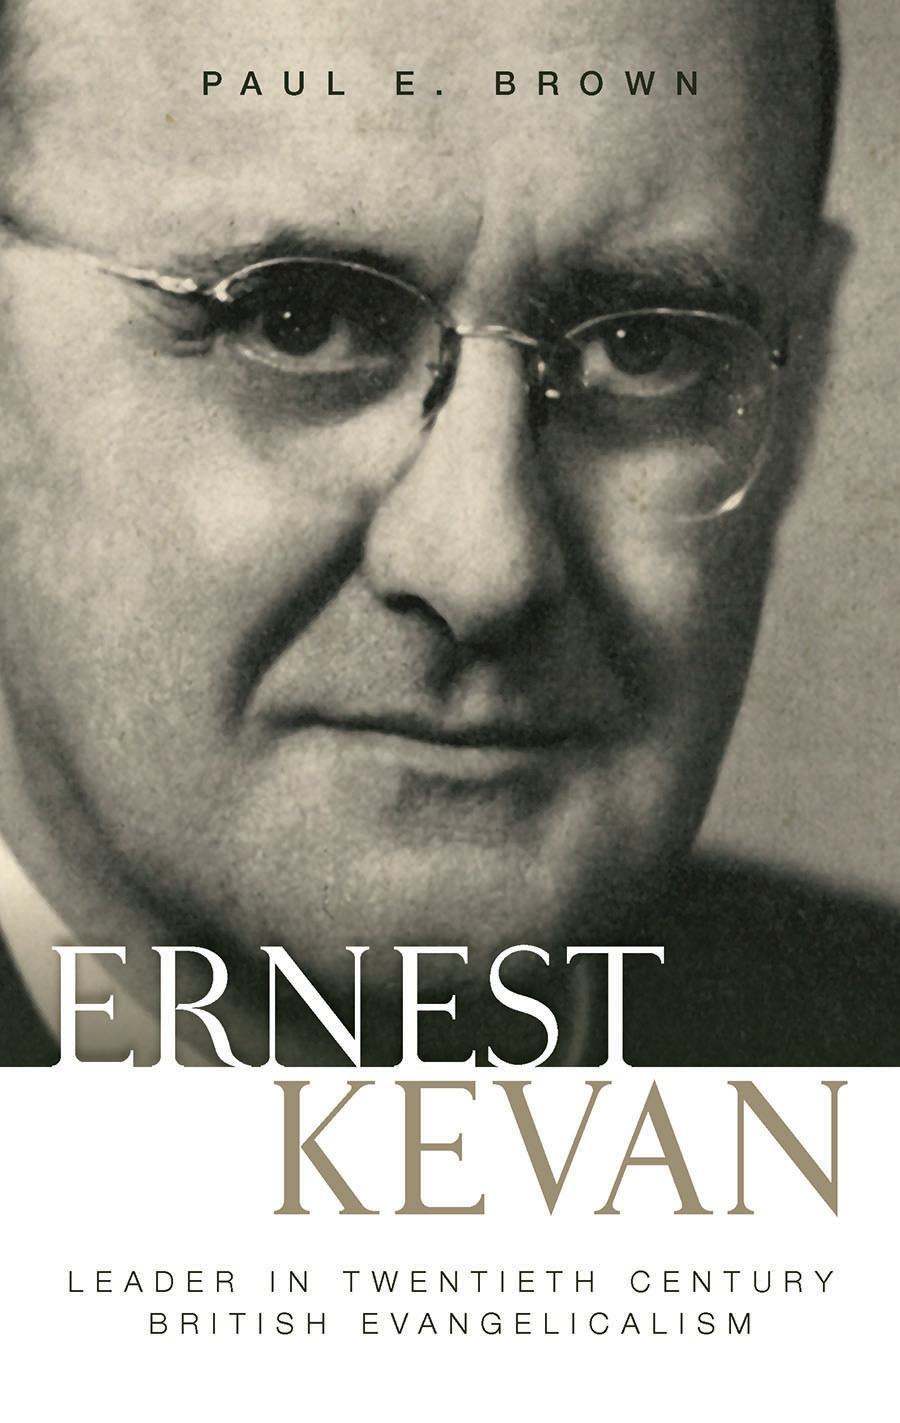 Book Cover For 'Ernest Kevan'